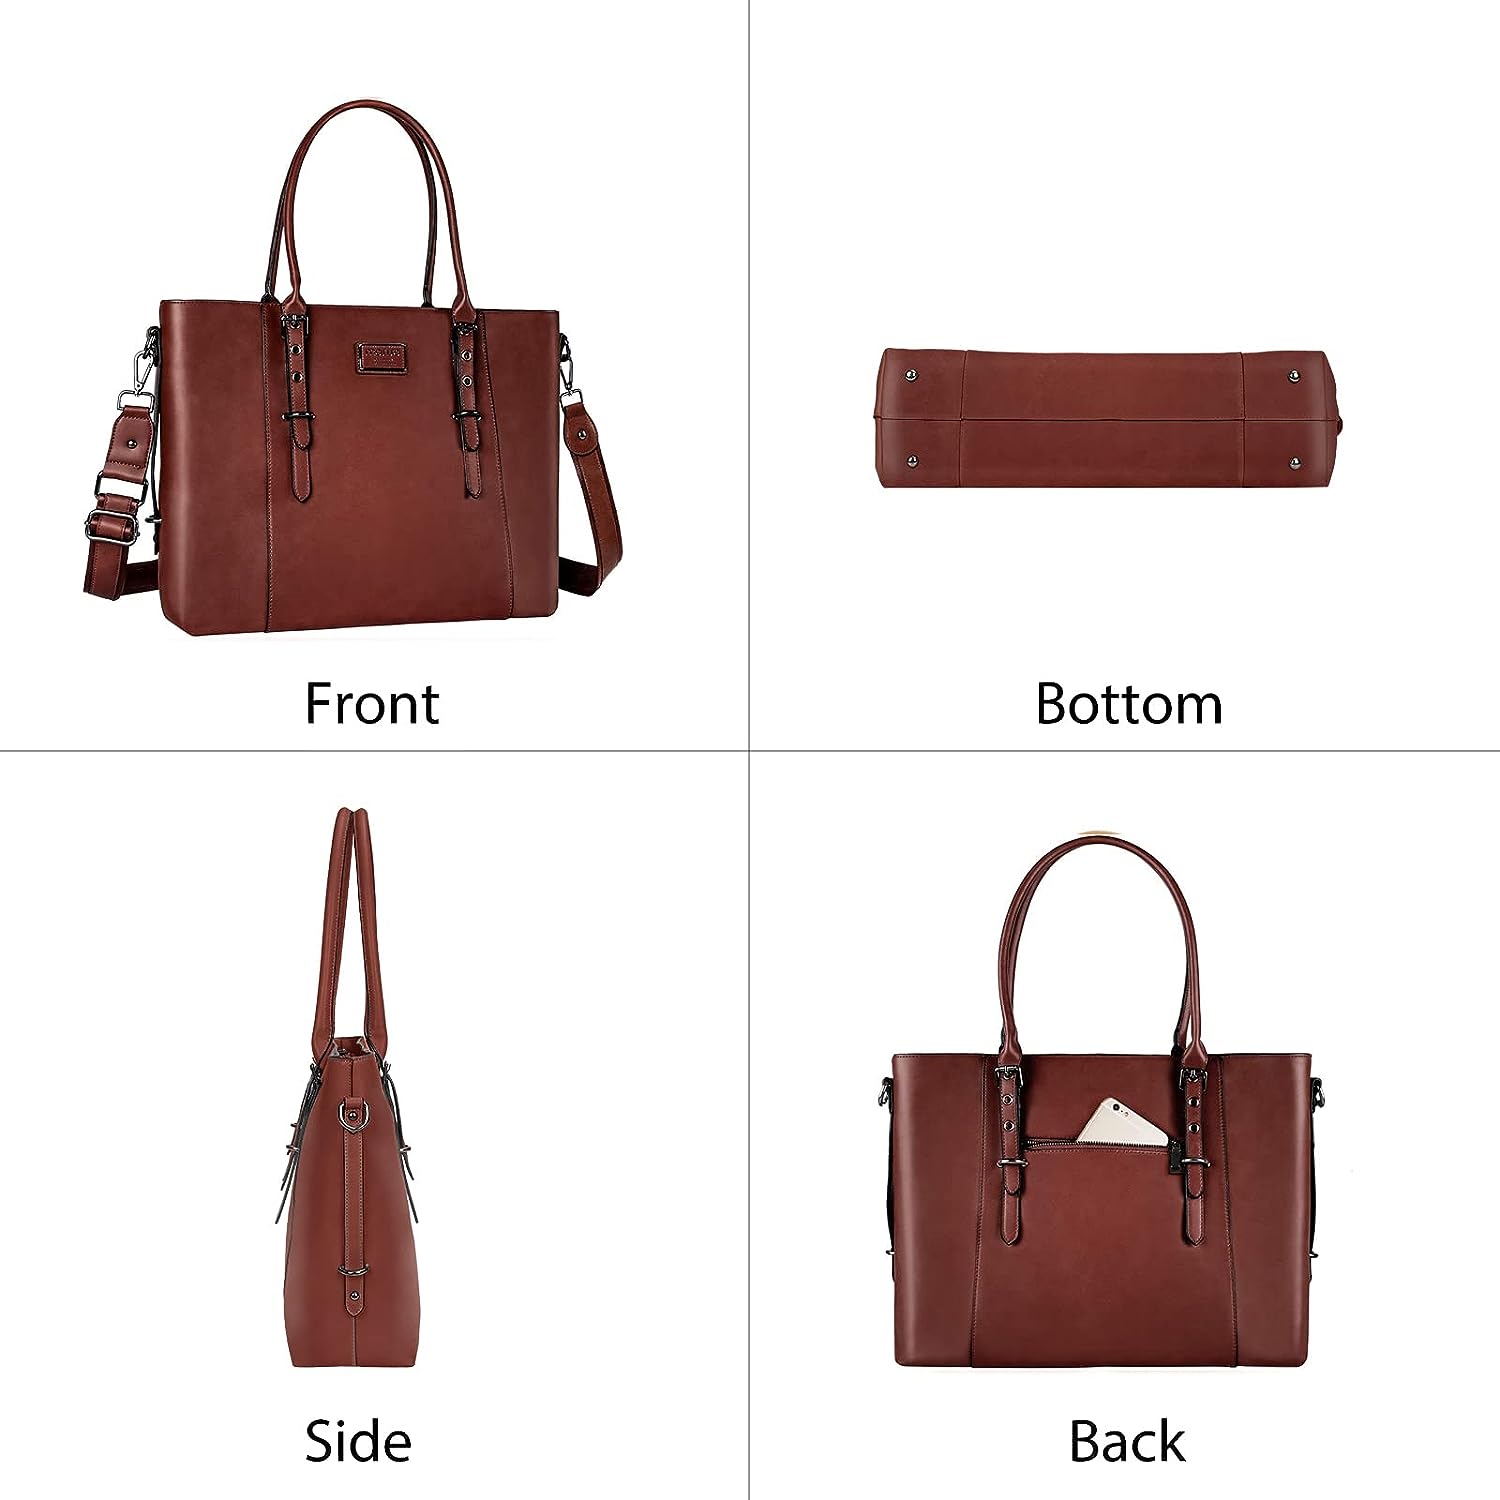 LeatherBag for Women Laptop Tote Bag 3